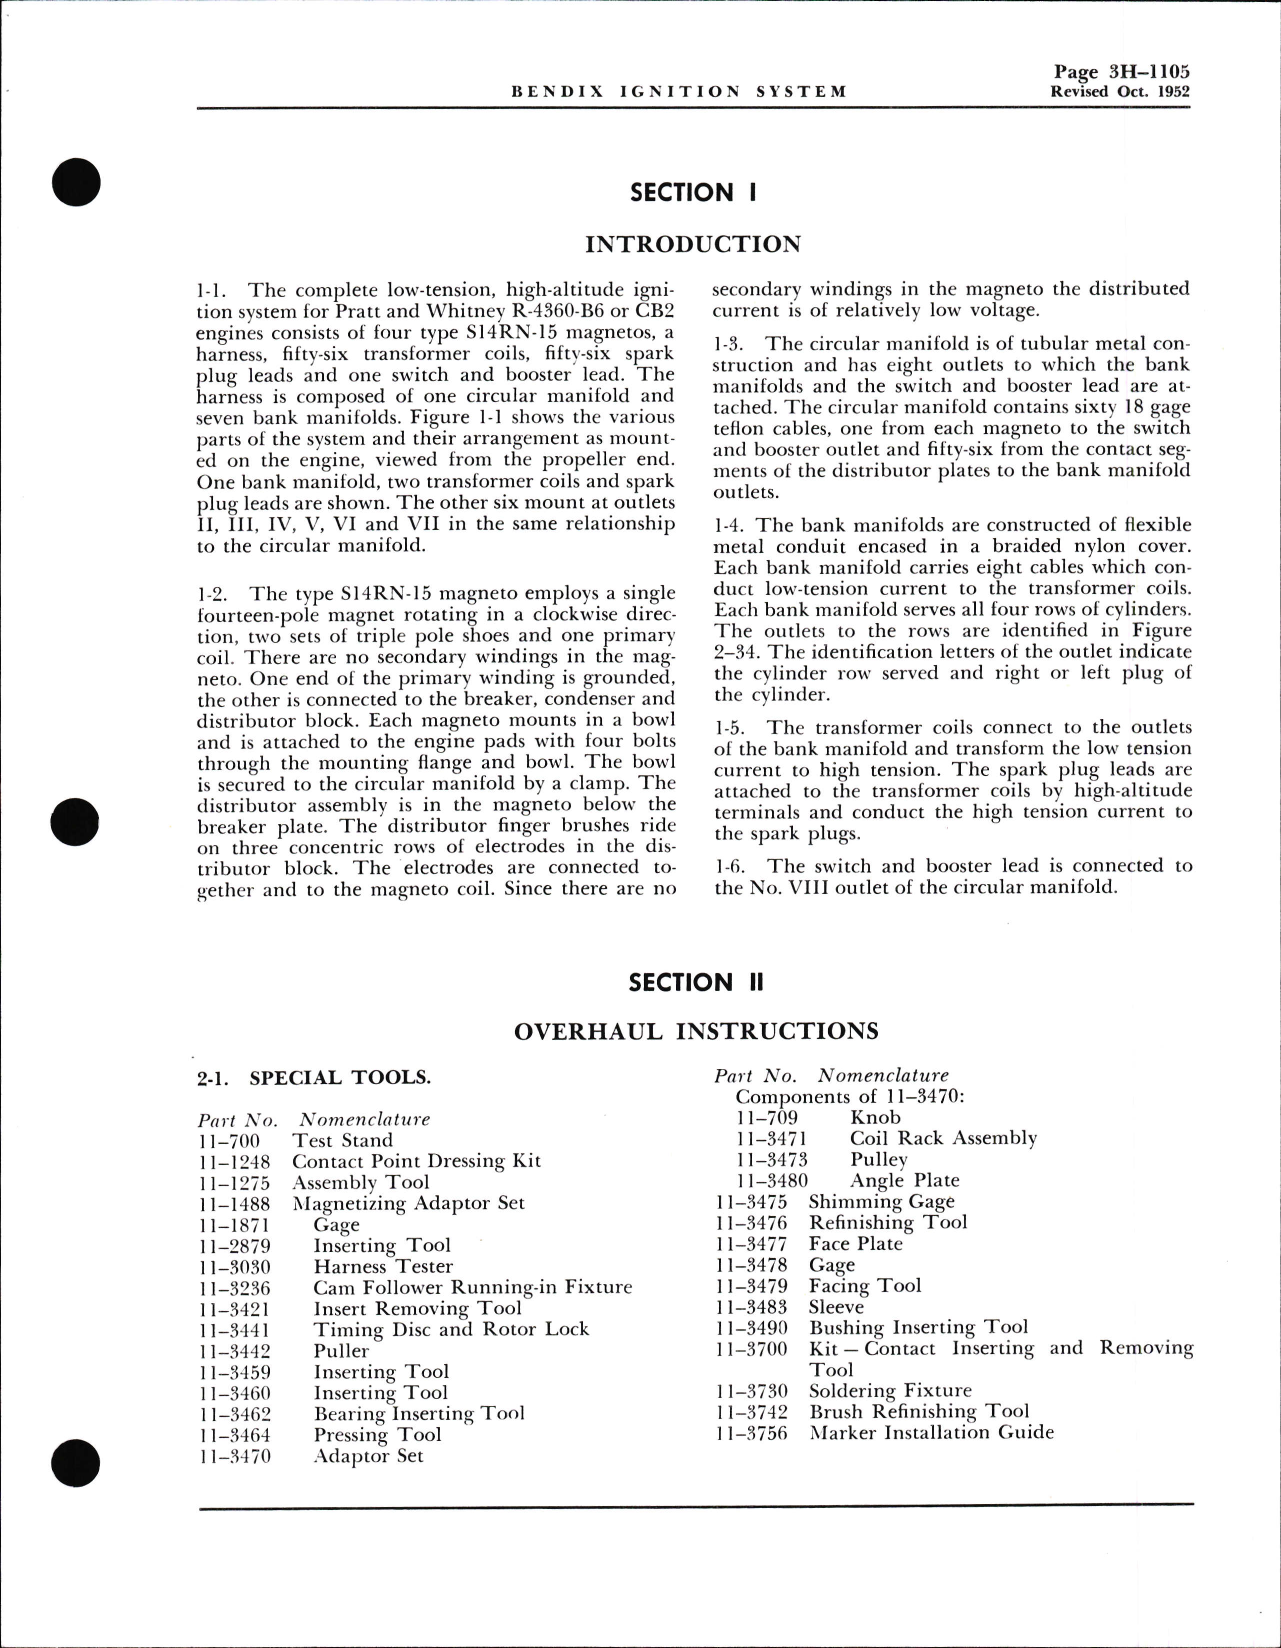 Sample page 5 from AirCorps Library document: Overhaul Instructions for Bendix Low Tension - High Altitude Ignition for Pratt & Whitney R-4360-B6 or CB2